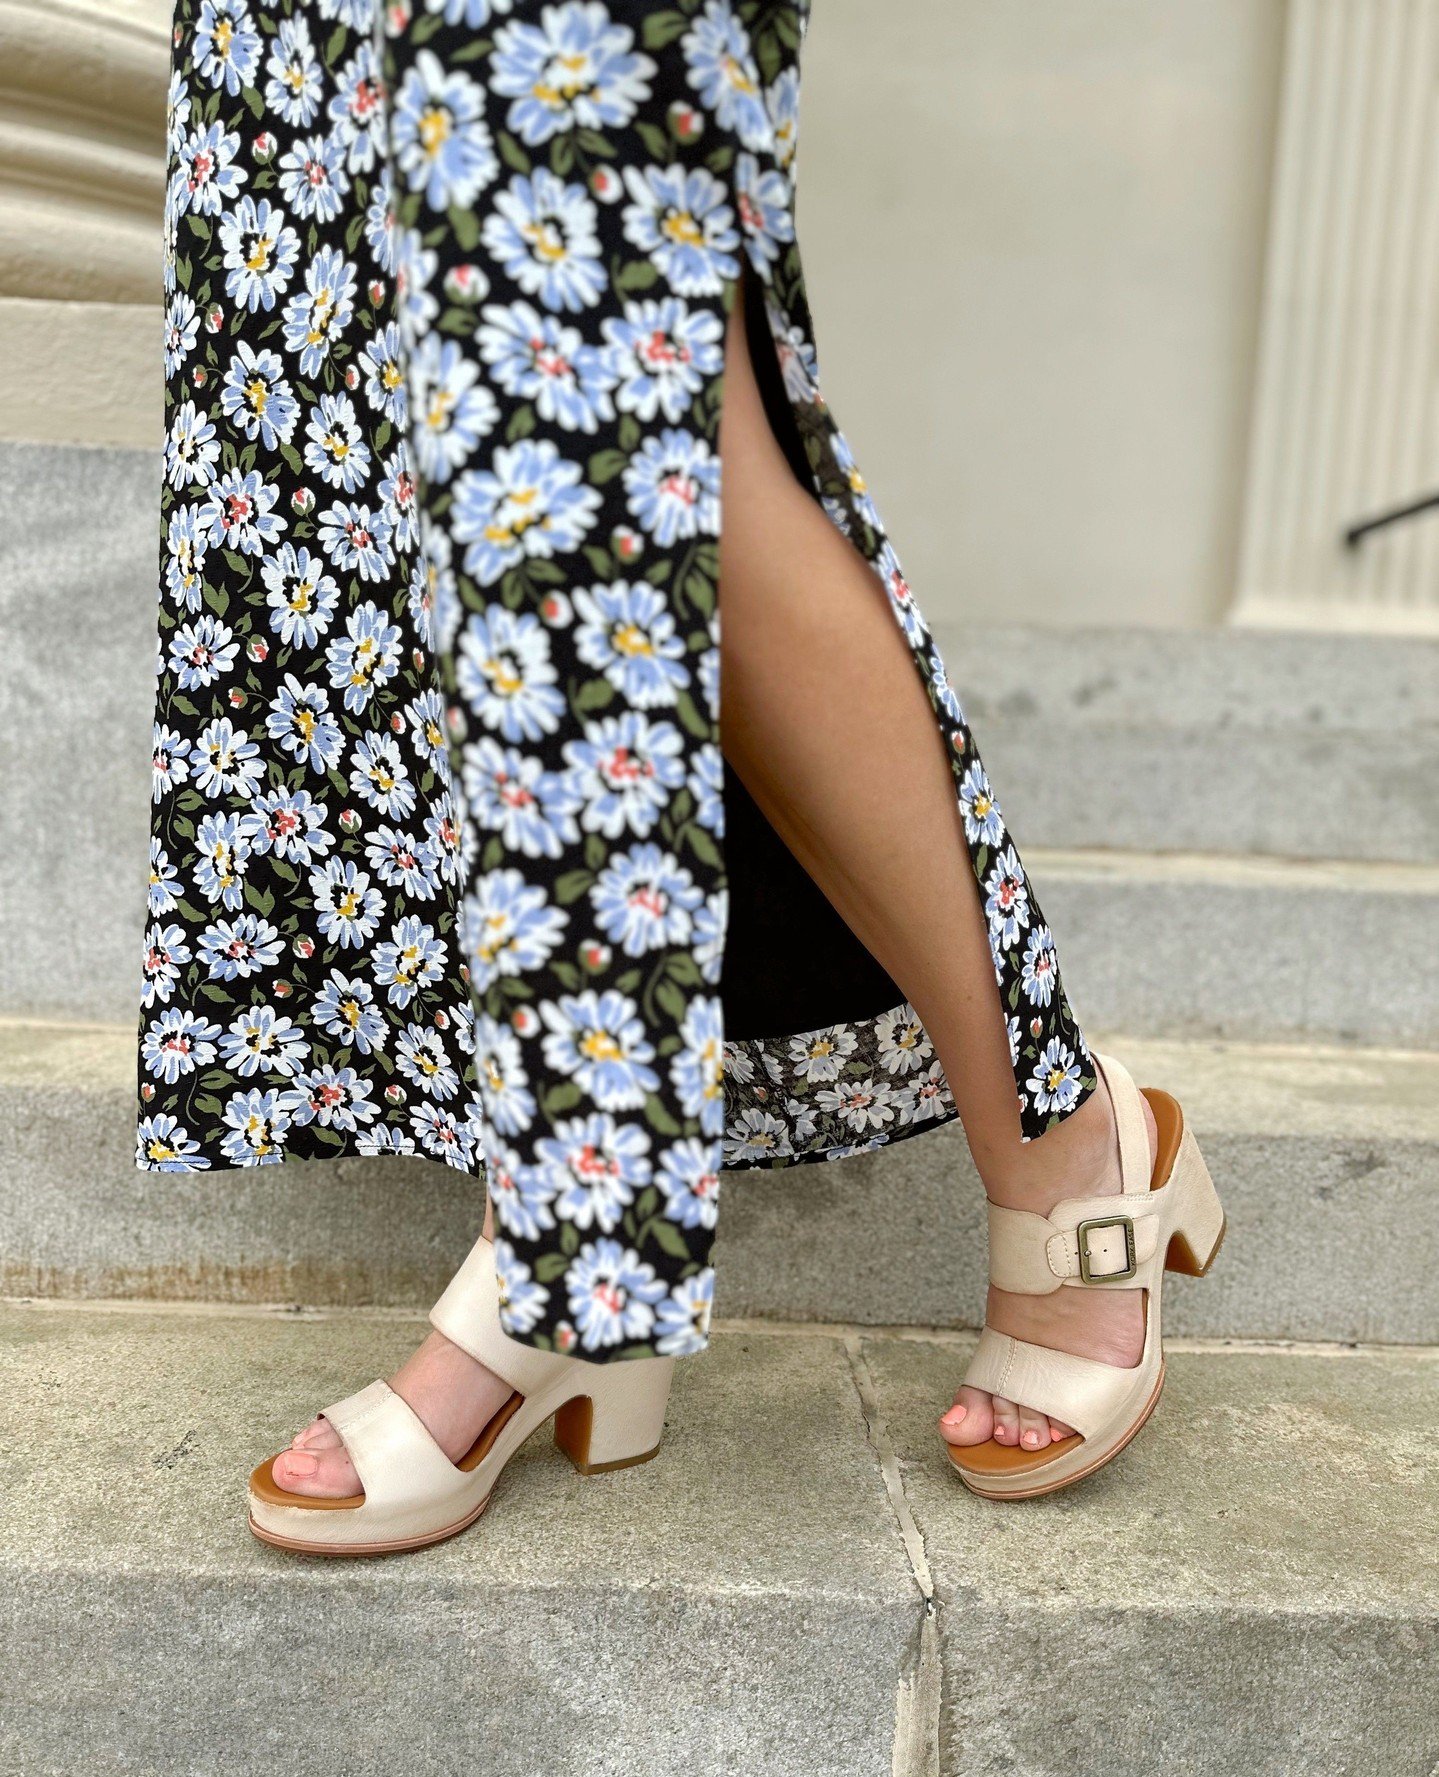 ✨️NEW SHOE ARRIVAL✨️ Introducing the &quot;SAN CARLOS SANDAL&quot;: a timeless staple that will last through all the seasons to come 👡 Comment &quot;SHOE&quot; to be sent the link!